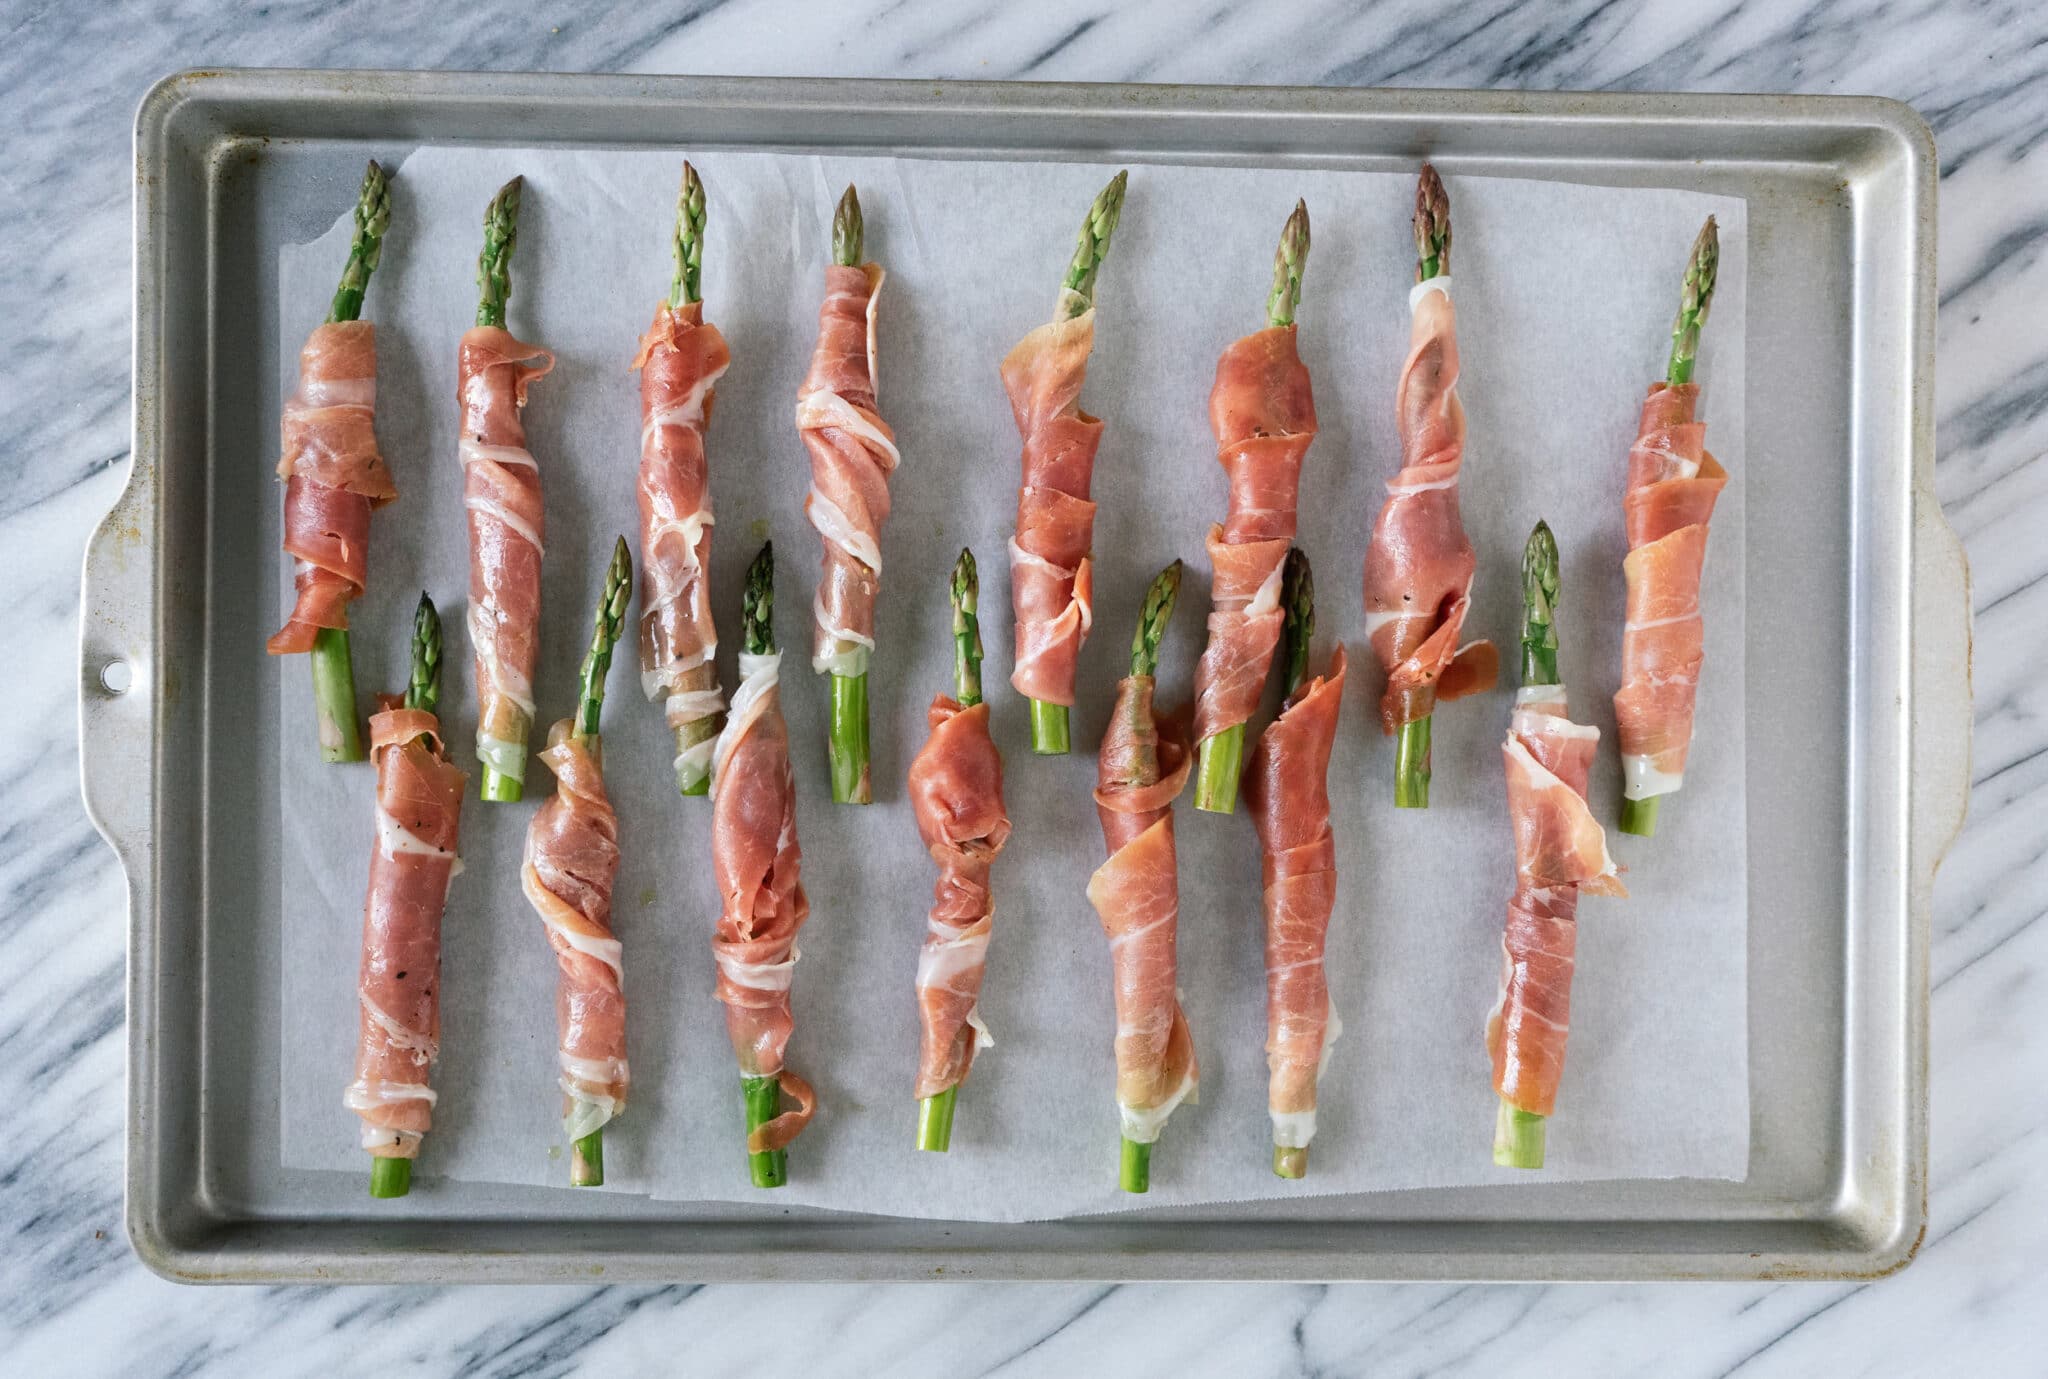 Above view of prosciutto wrapped asparagus on a baking sheet prior to being baked